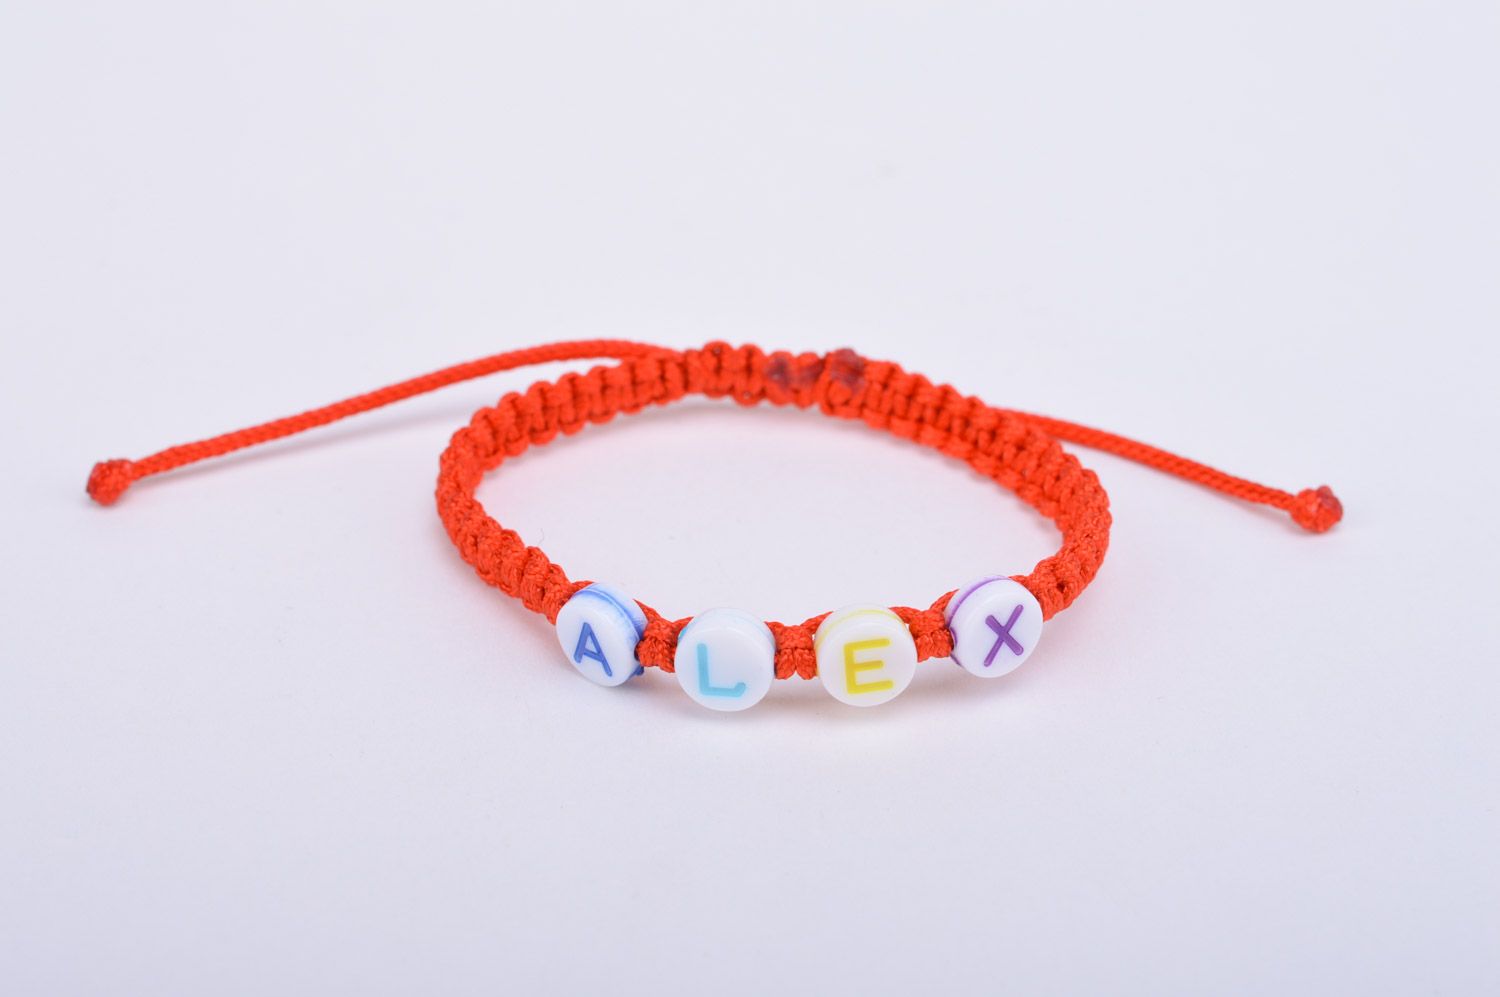 Handmade friendship name bracelet woven of red threads of adjustable size photo 2